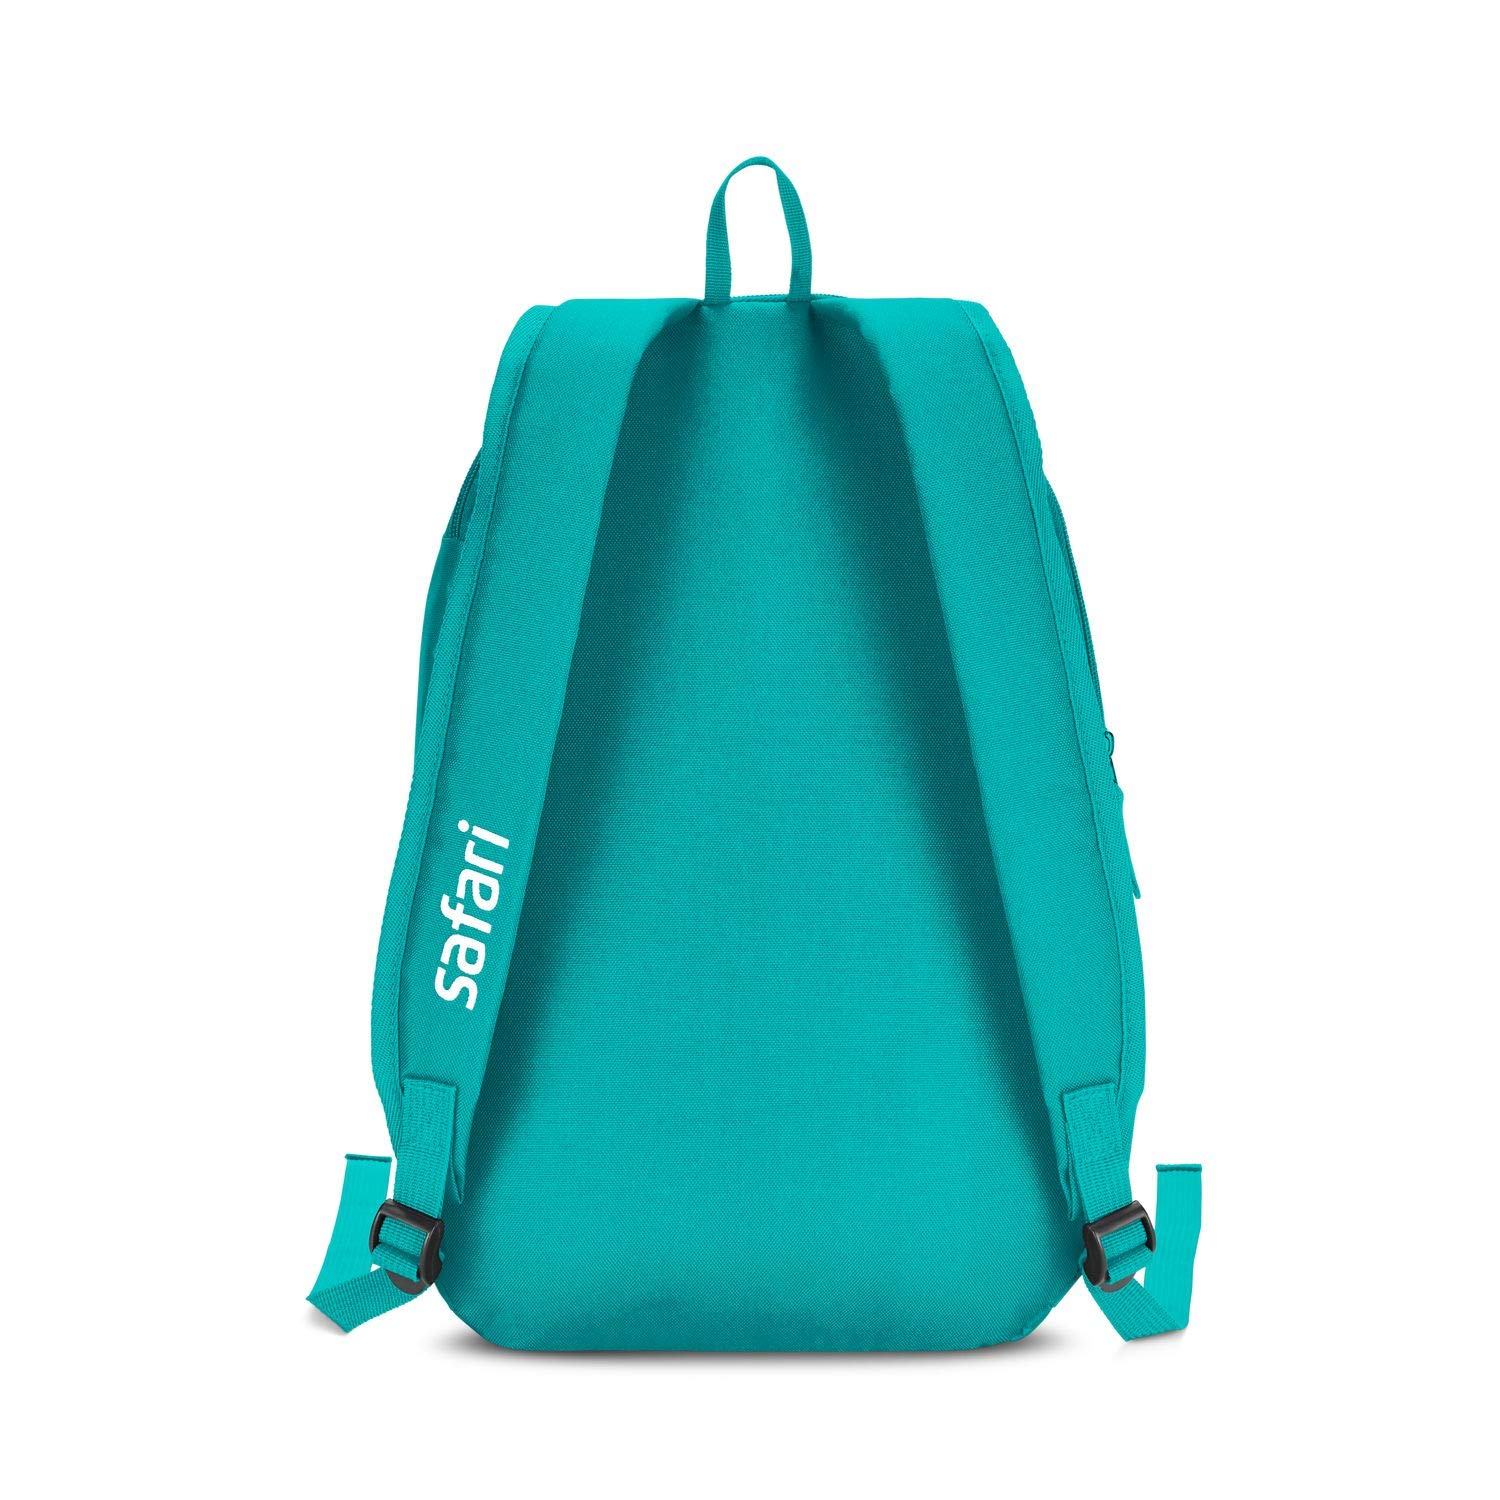 SeaBags DJ Small 15 Ltrs. Backpack for school college office tuition  backpack for lunch. 15 L Backpack Sky Blue - Price in India